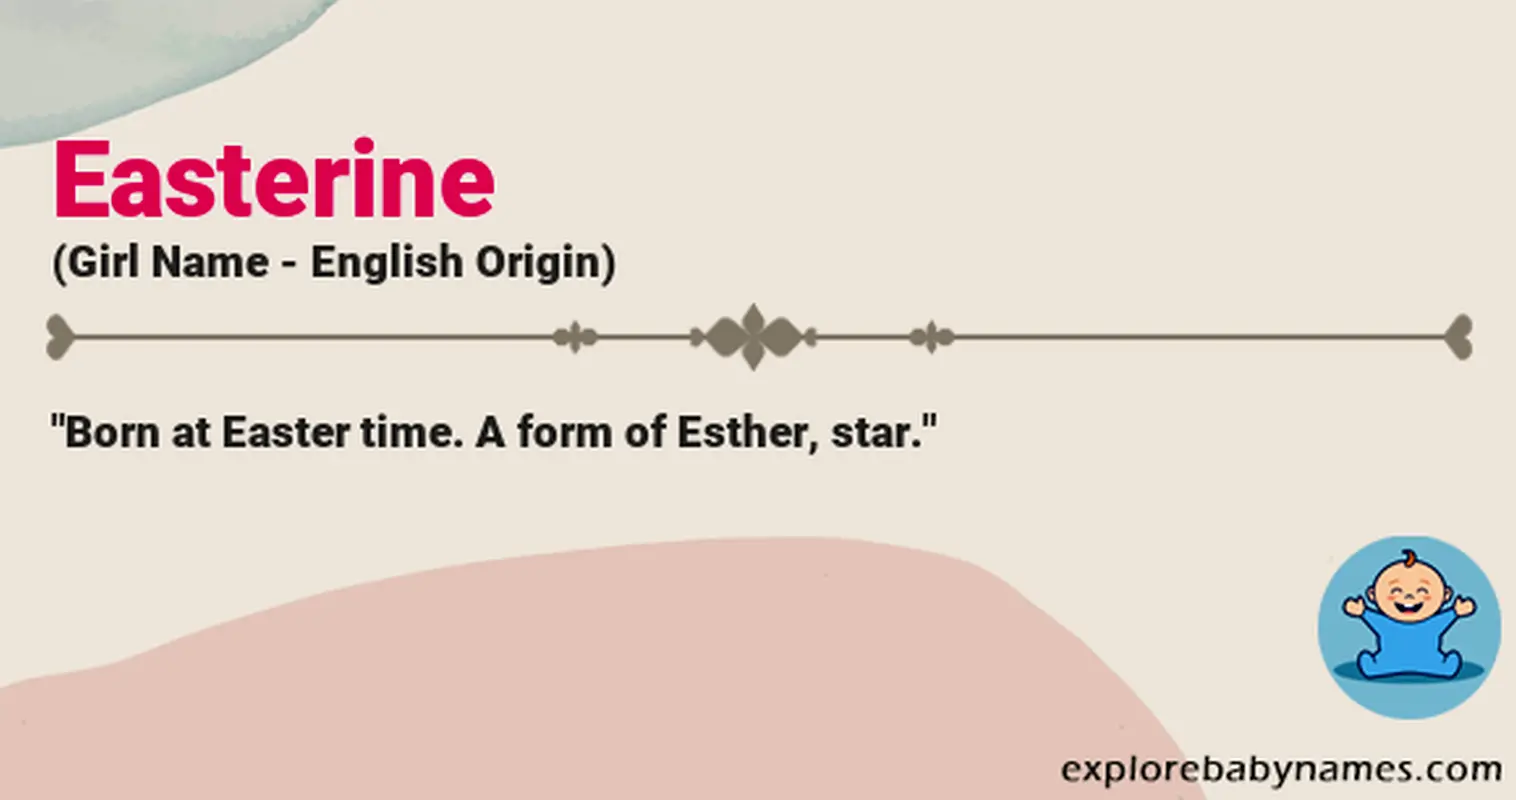 Meaning of Easterine